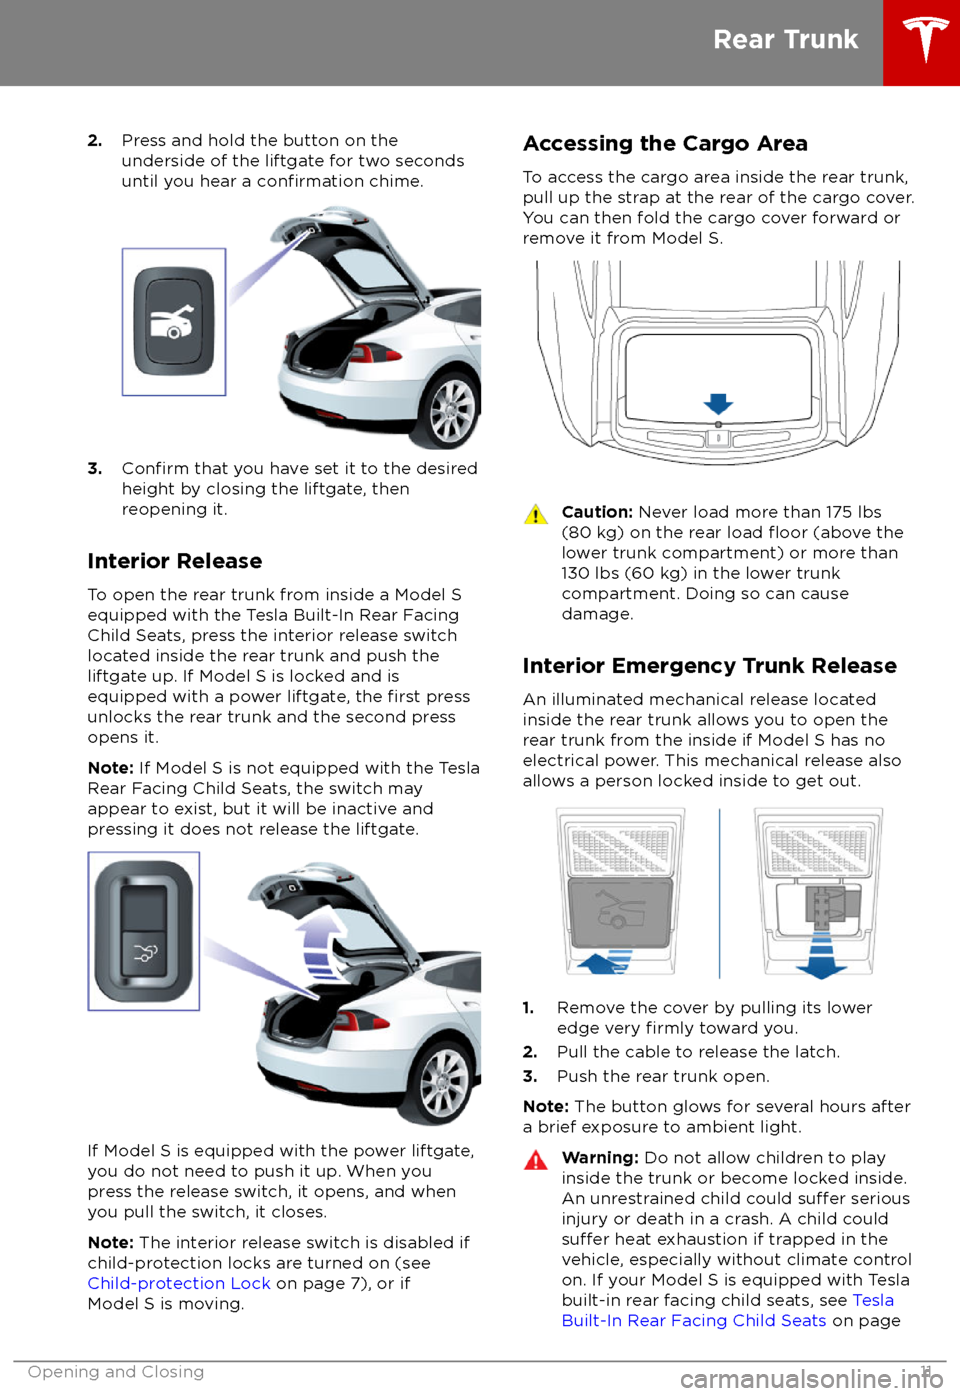 TESLA MODEL S 2018  Owners Manual  2.Press and hold the button on the
underside of the liftgate for two seconds
until you hear a 
confirmation chime.
3.Confirm that you have set it to the desired
height by closing the liftgate, then
re